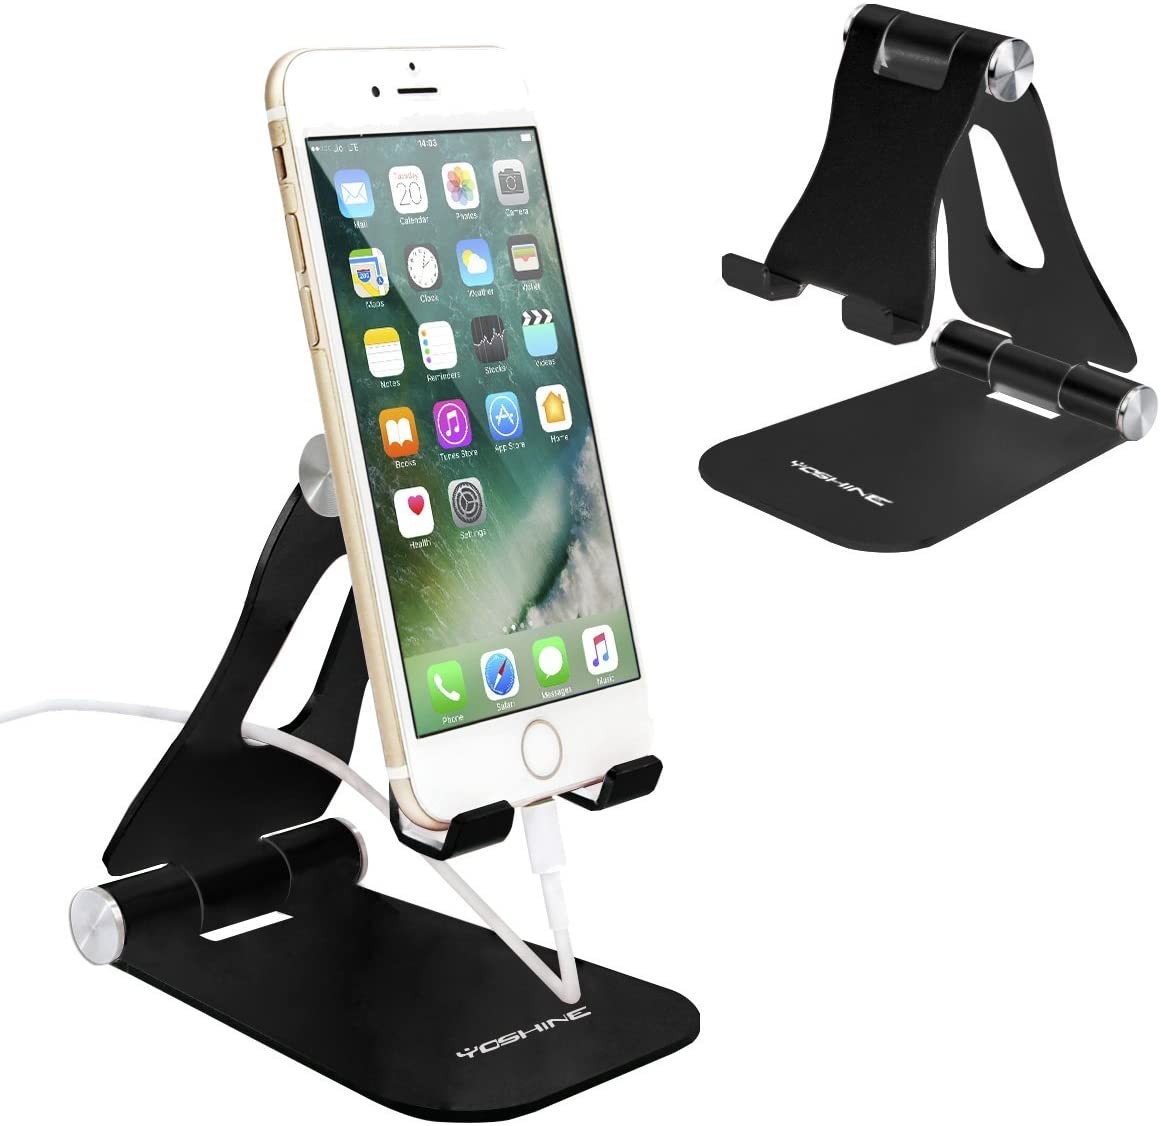 Cell Phone Stand,iPhone Stand Adjustable iPad Stand Tablet Stand Desk Cell Phone Holder Foldable